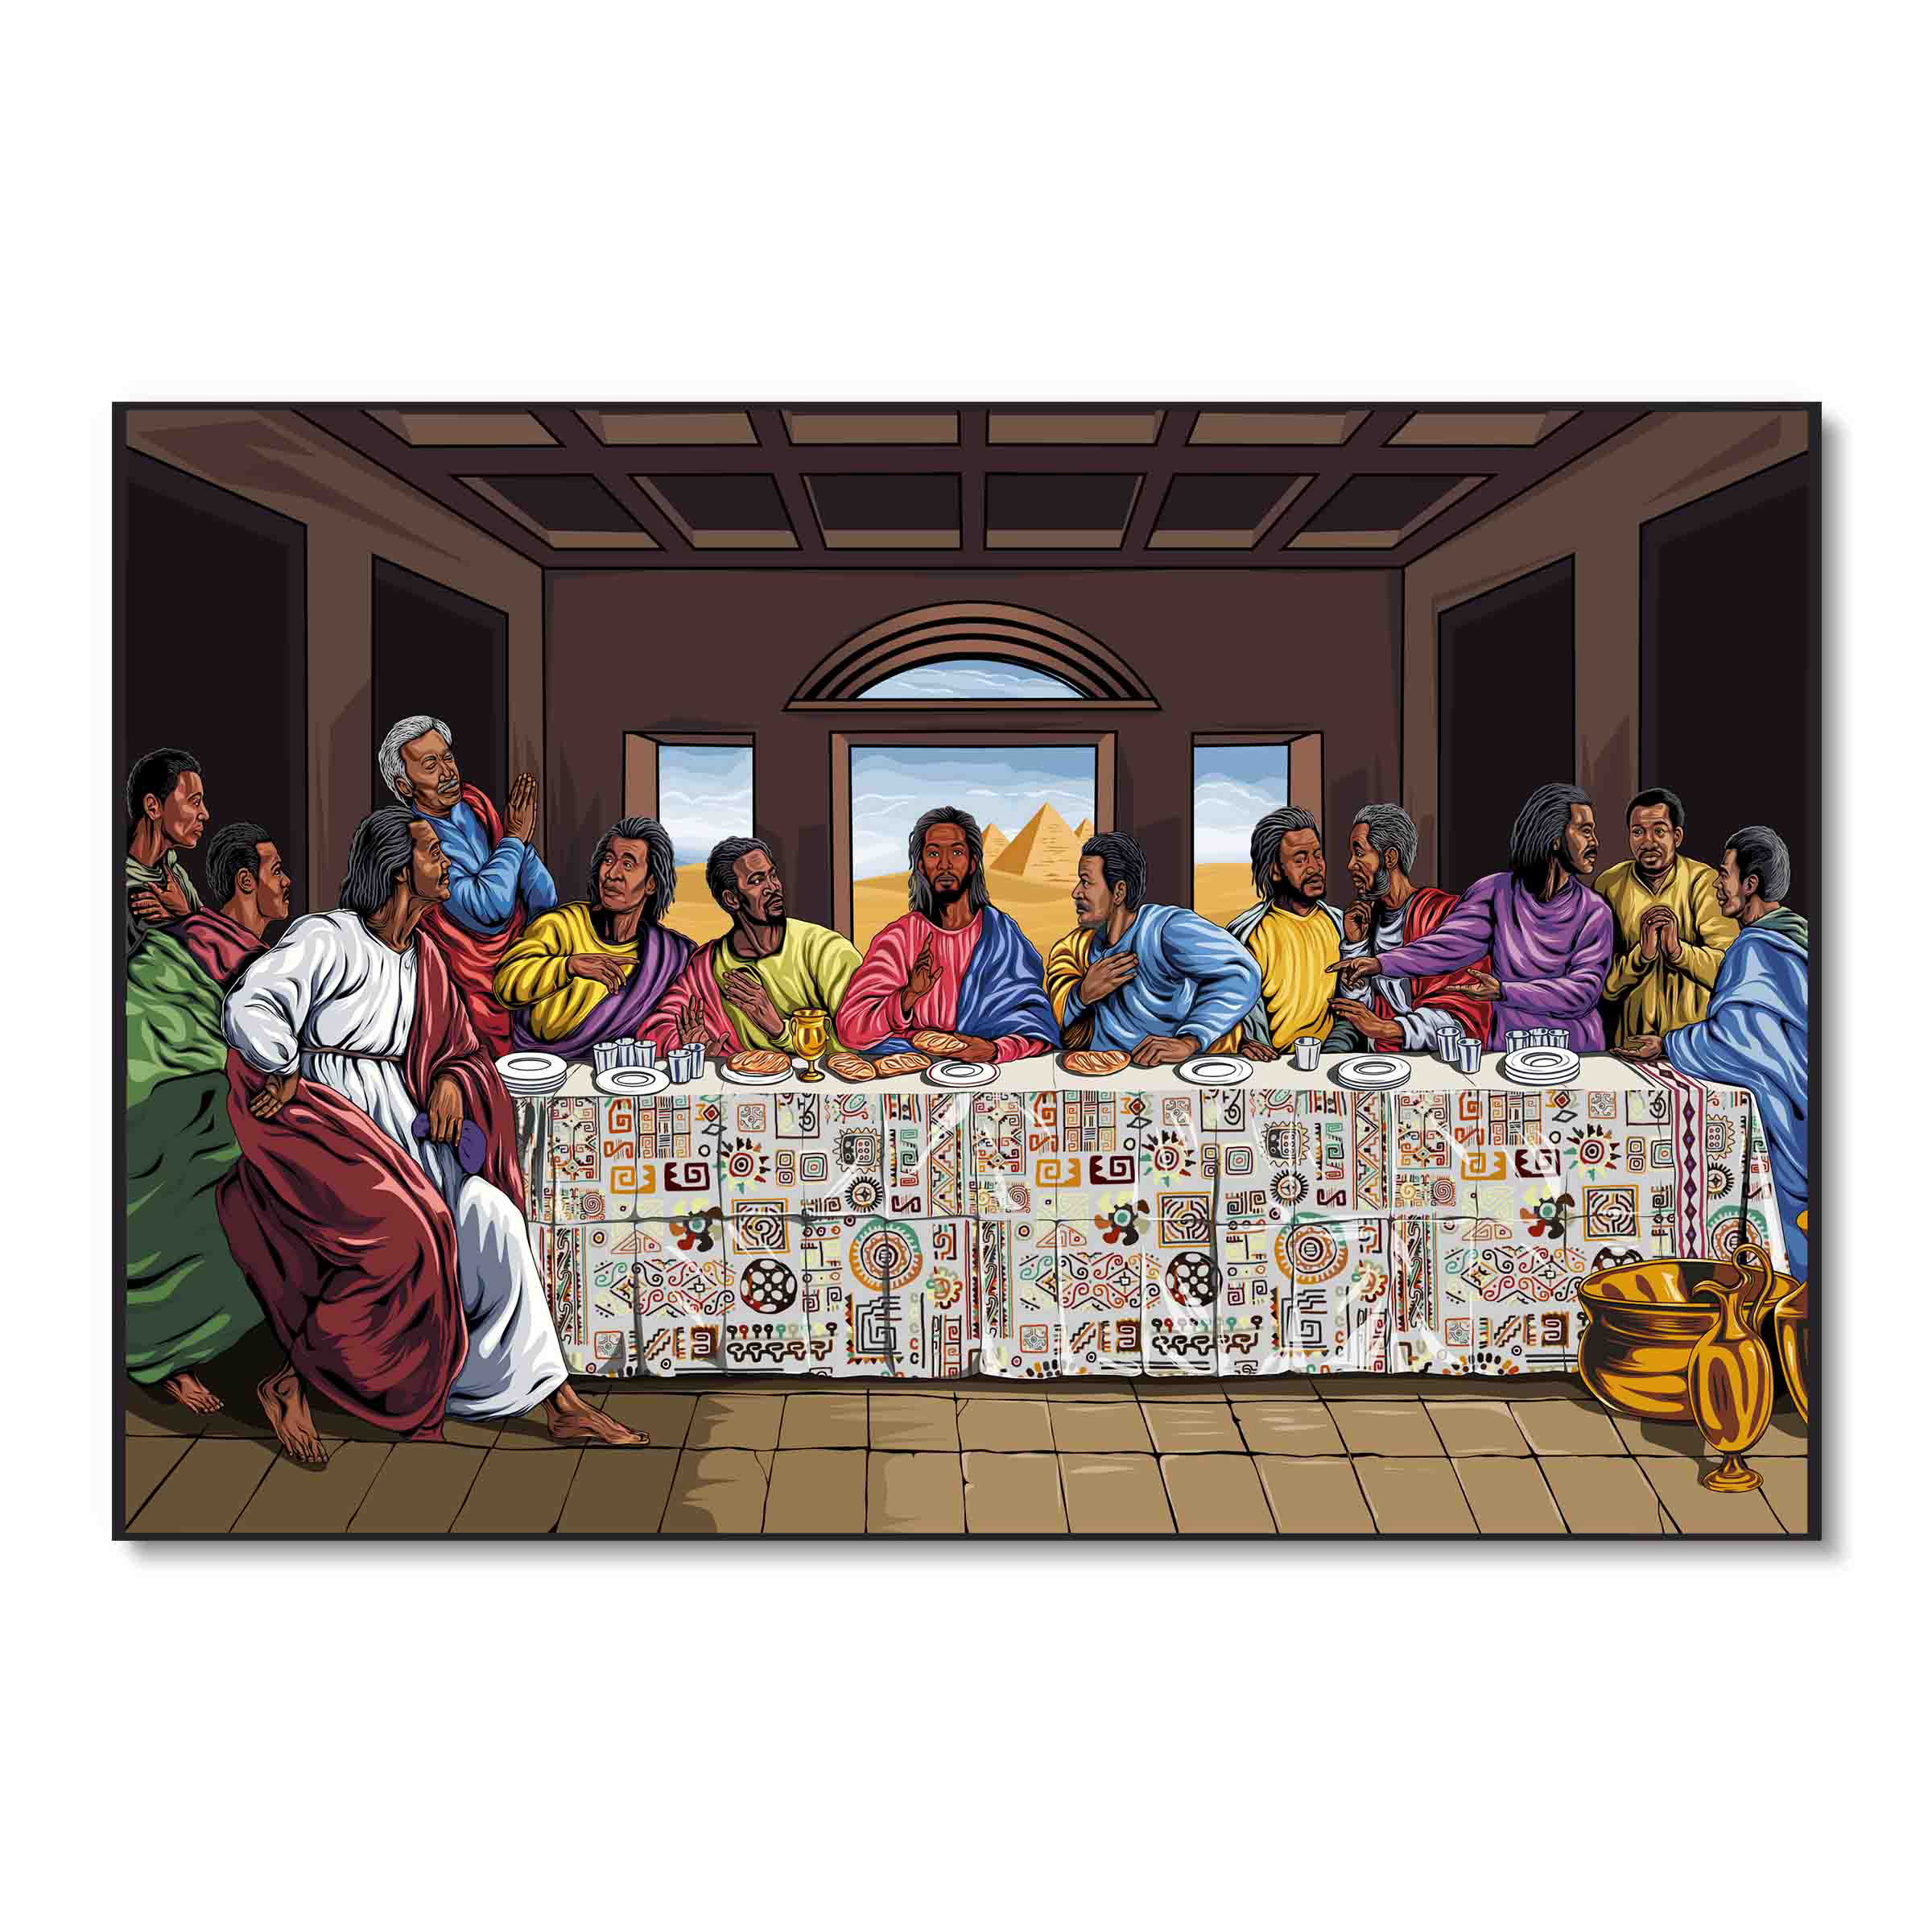 The Last Supper | Last supper, Dining room wall decor, Pictures for kitchen  walls